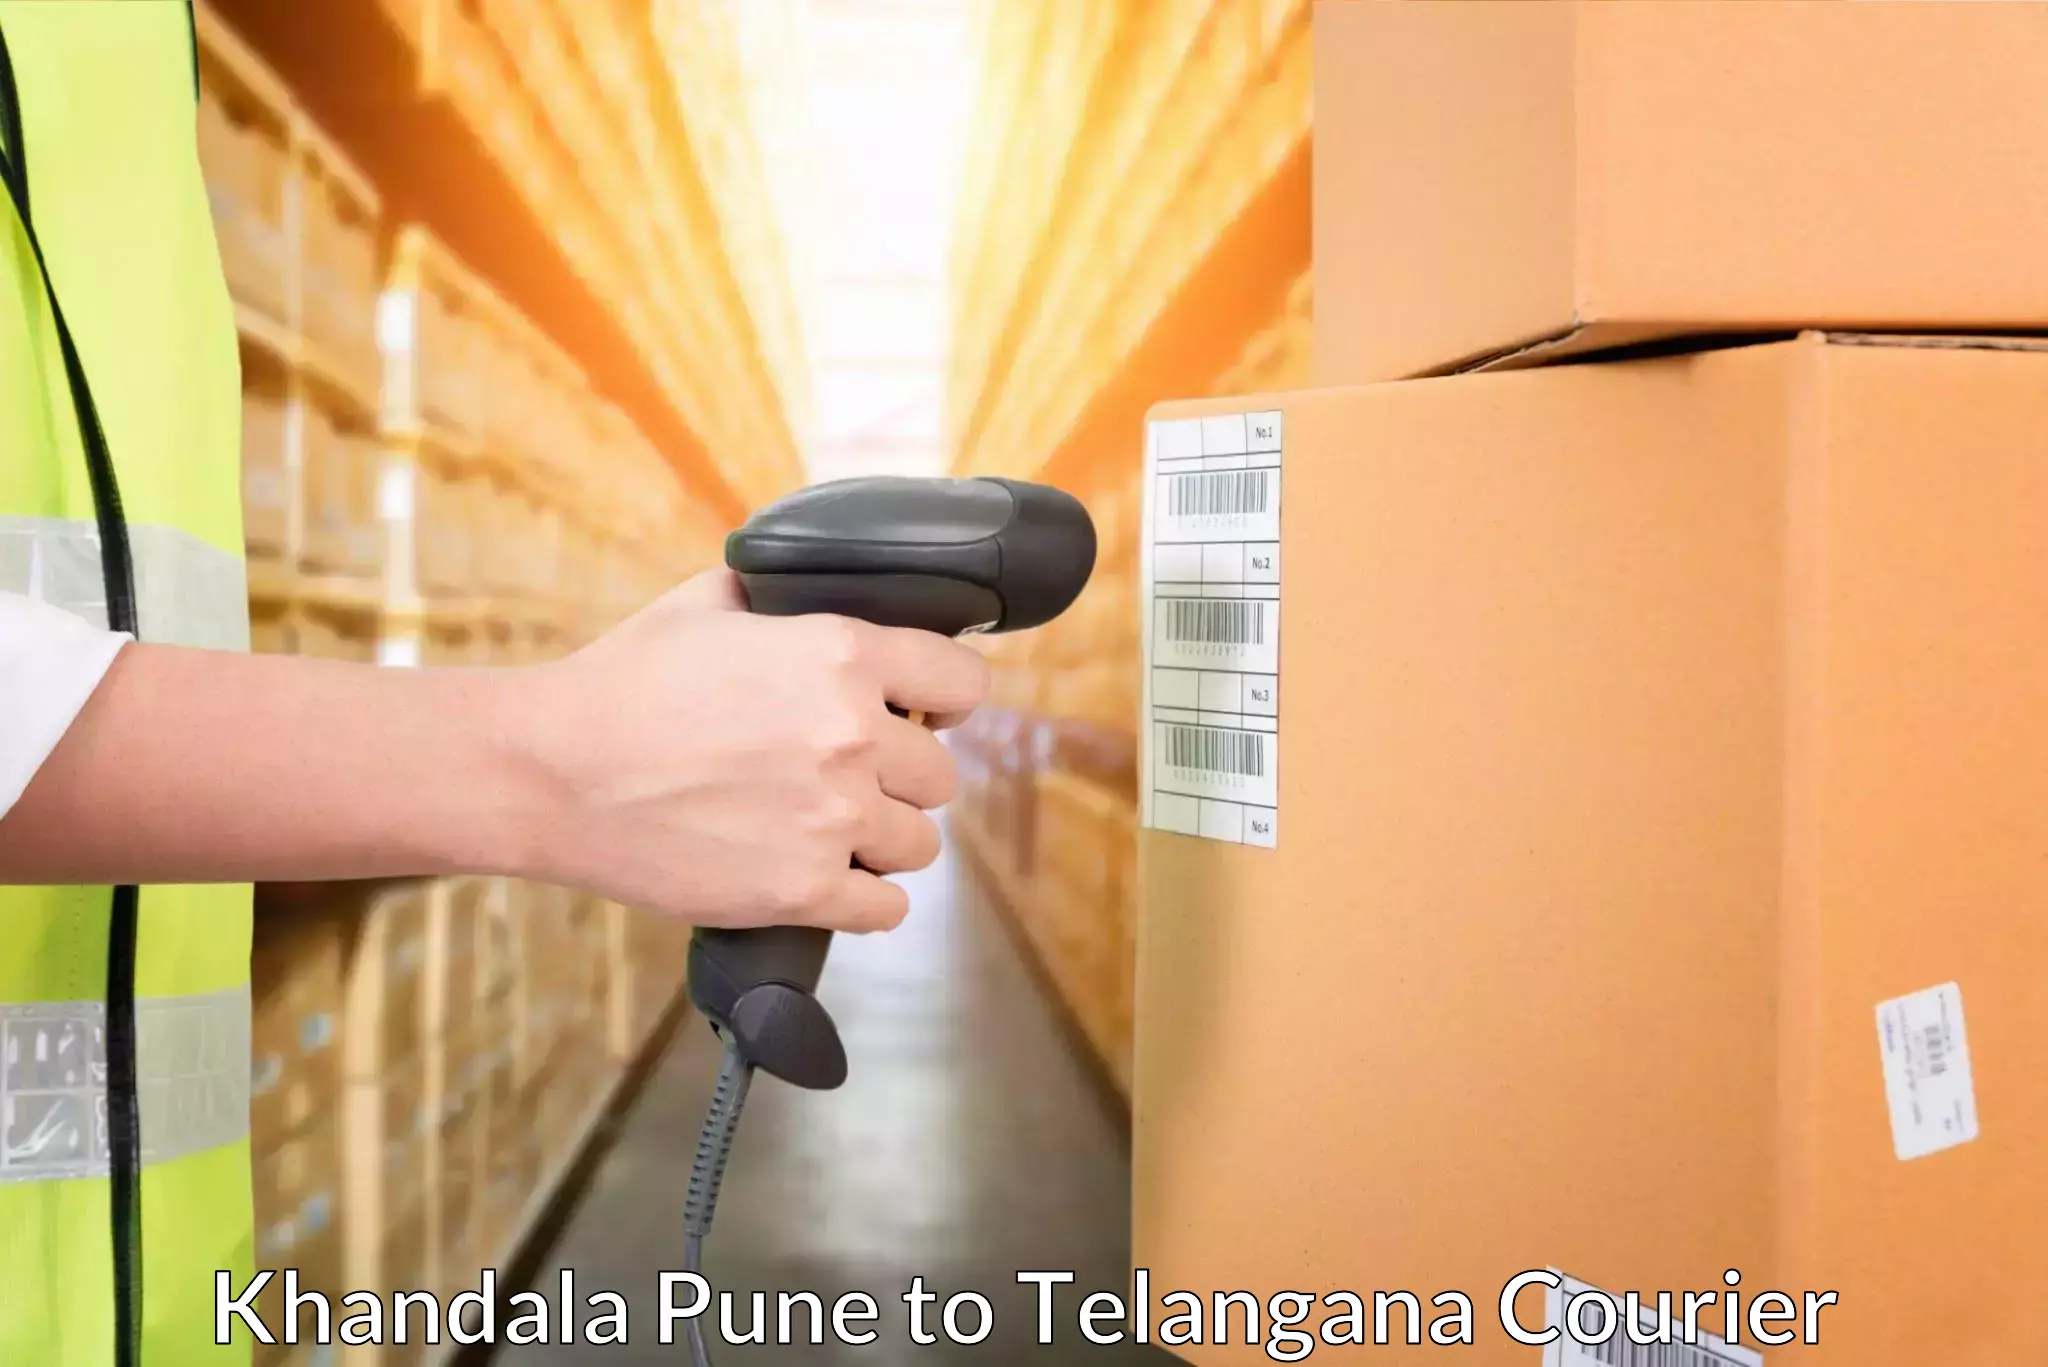 Premium courier solutions in Khandala Pune to Secunderabad